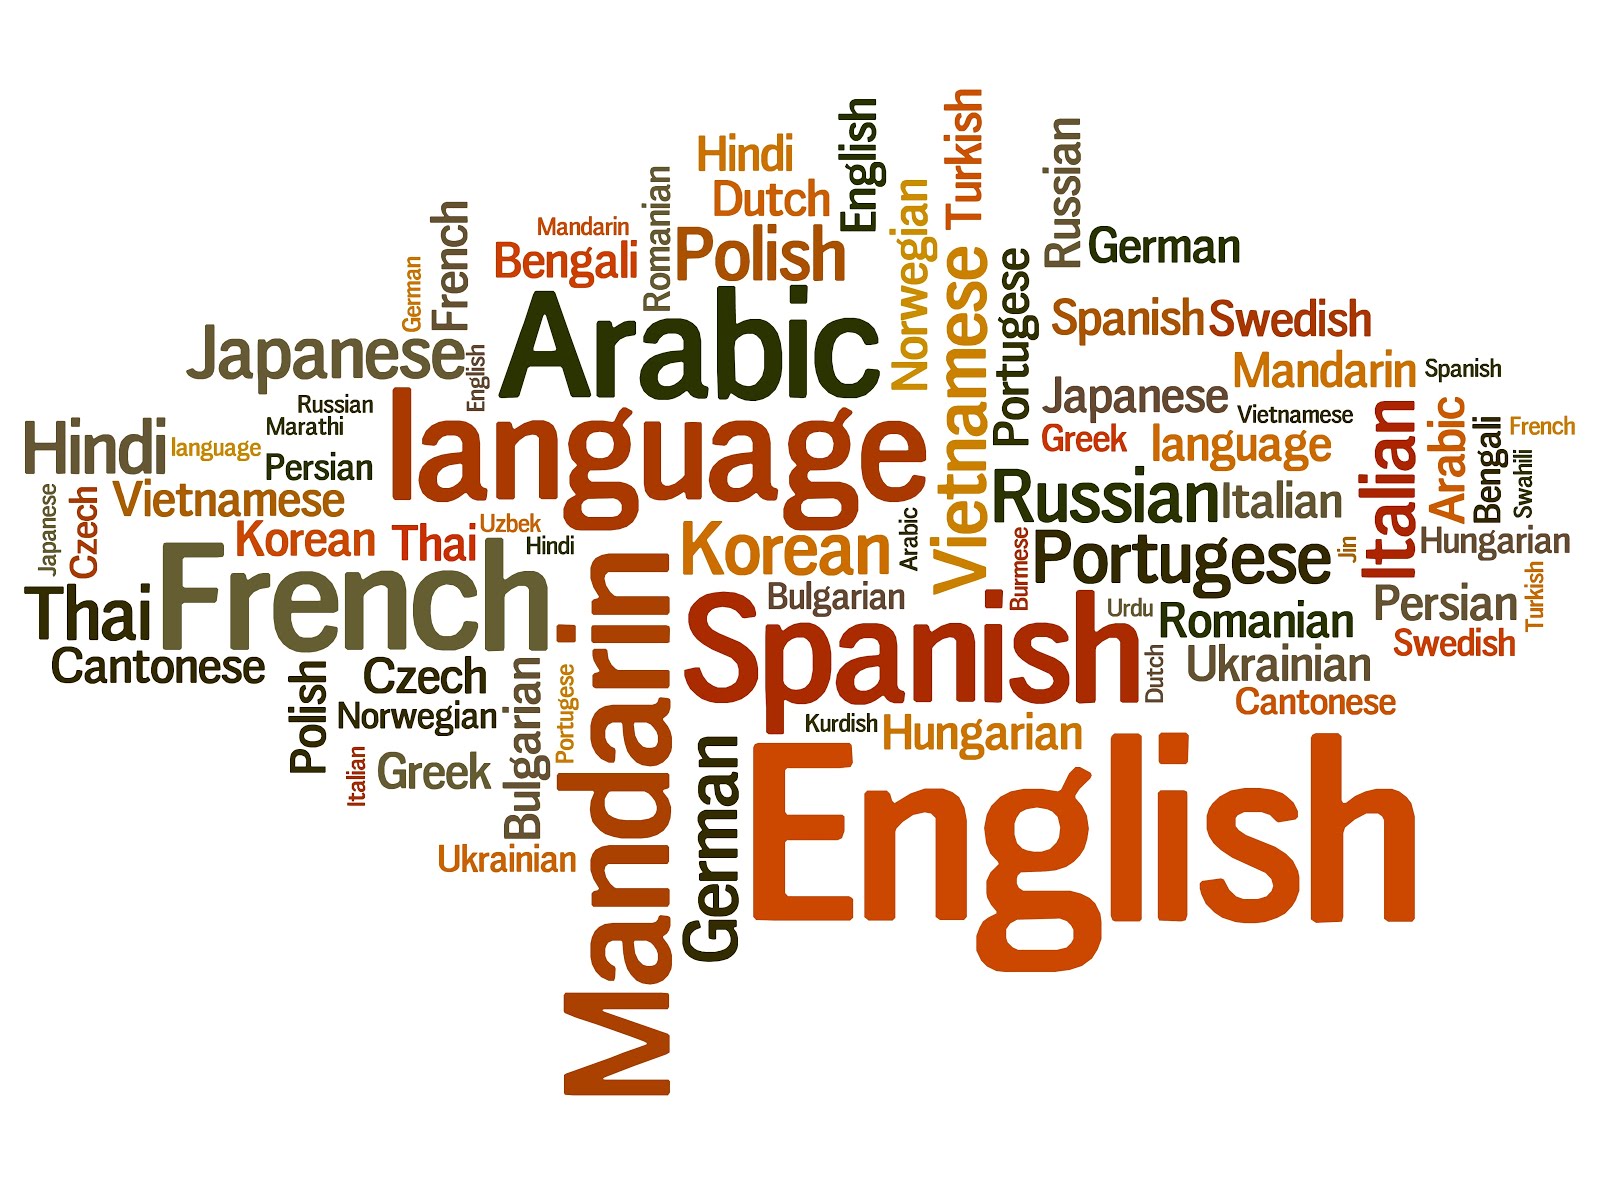 Aiflc  offers Foreign language translation services